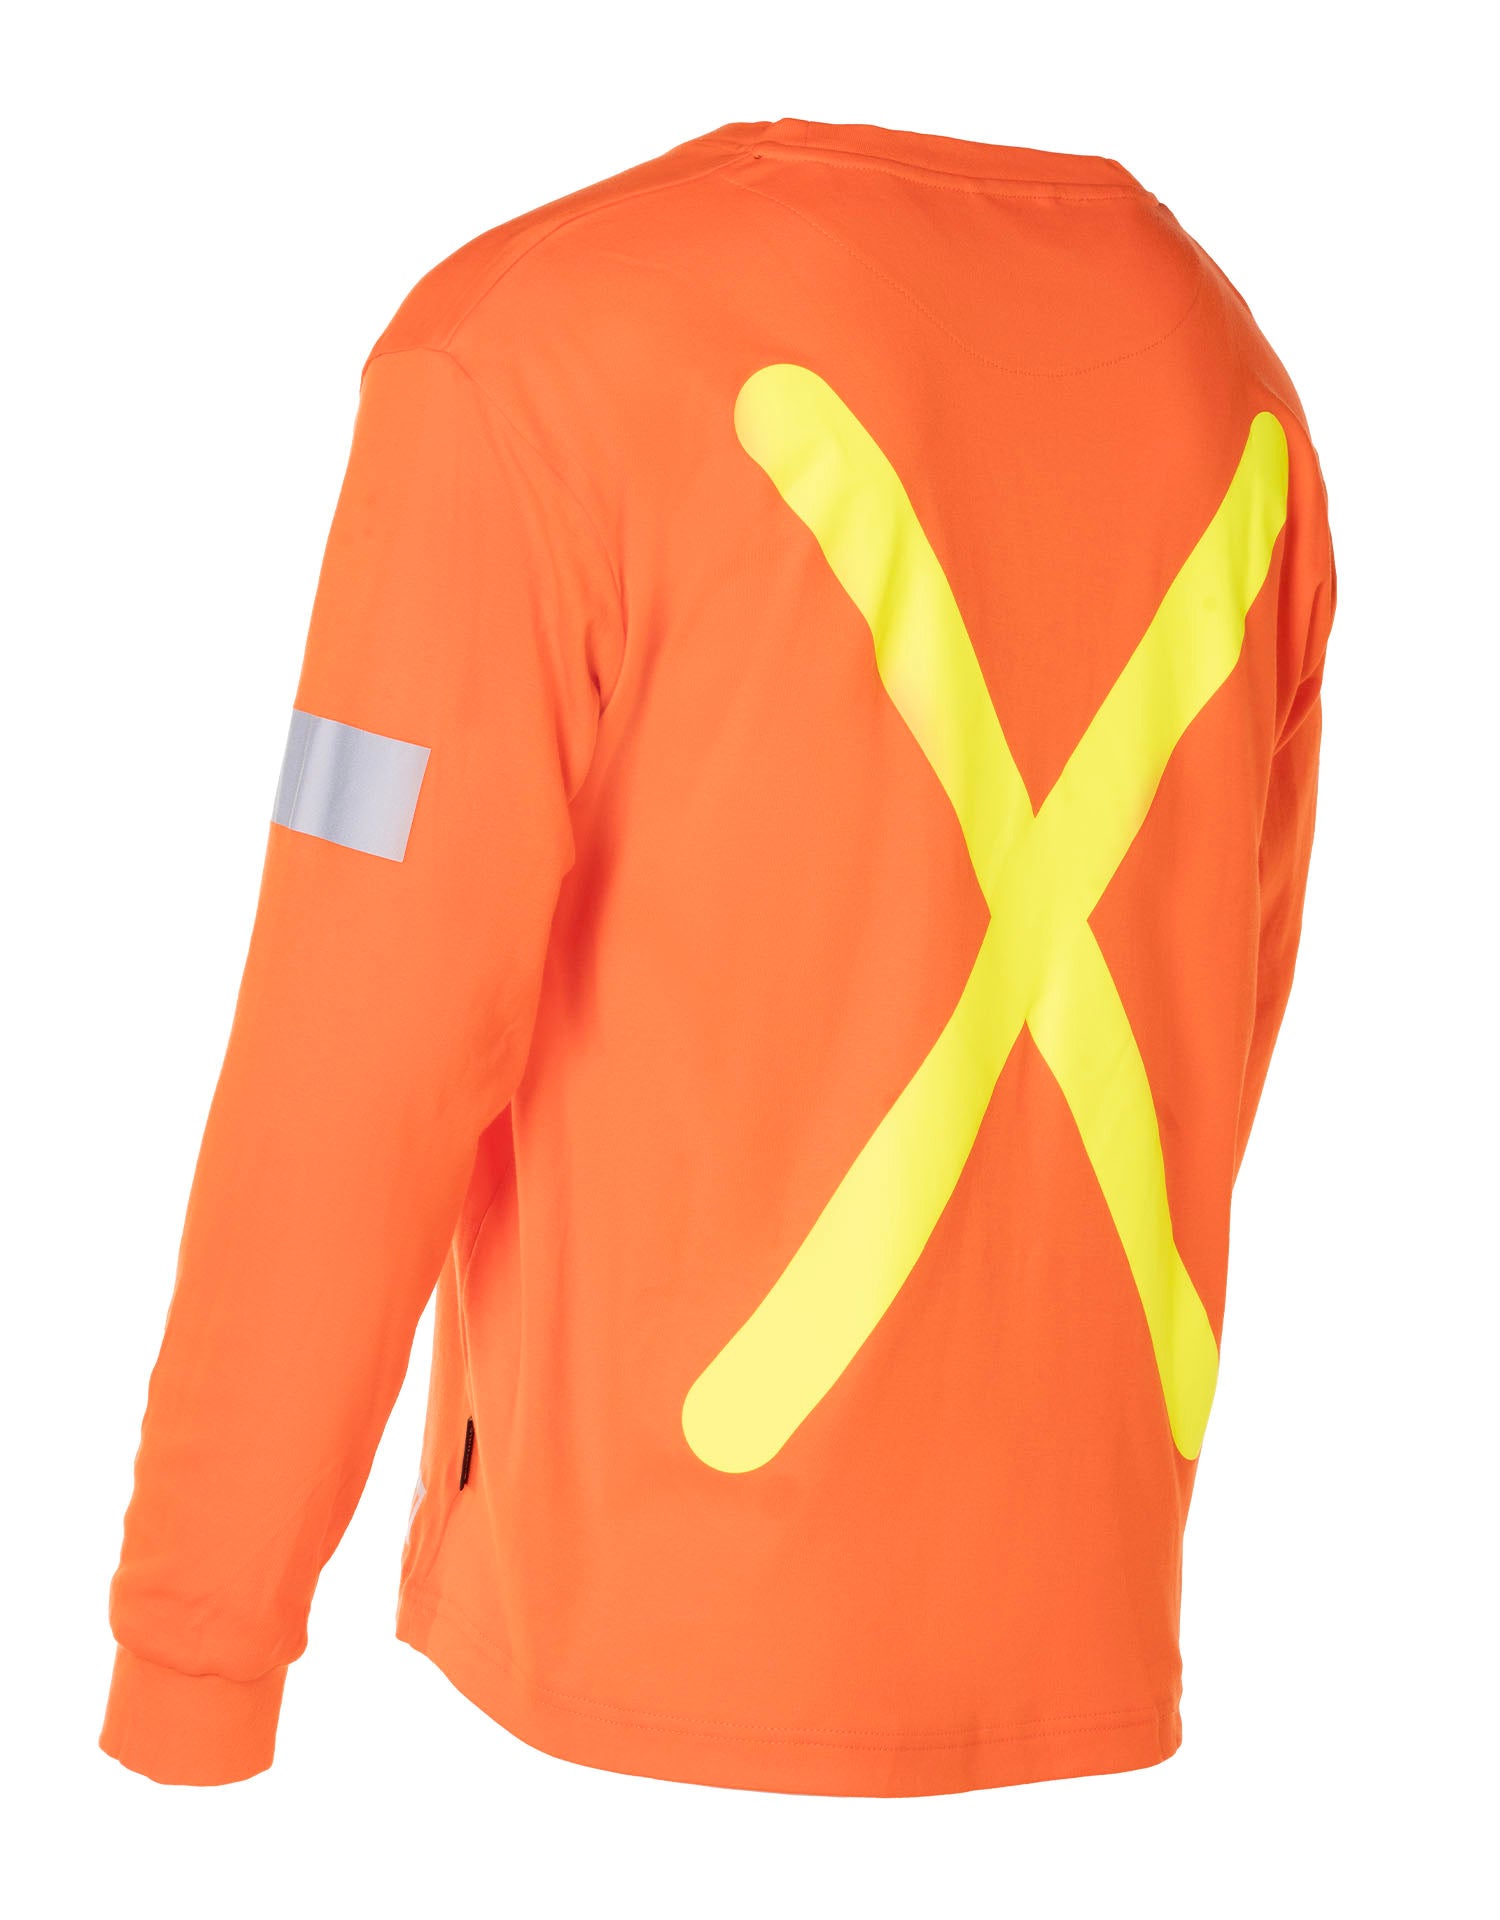 Retro Safety Cotton Long Sleeve Tee With Reflective Arm Striping